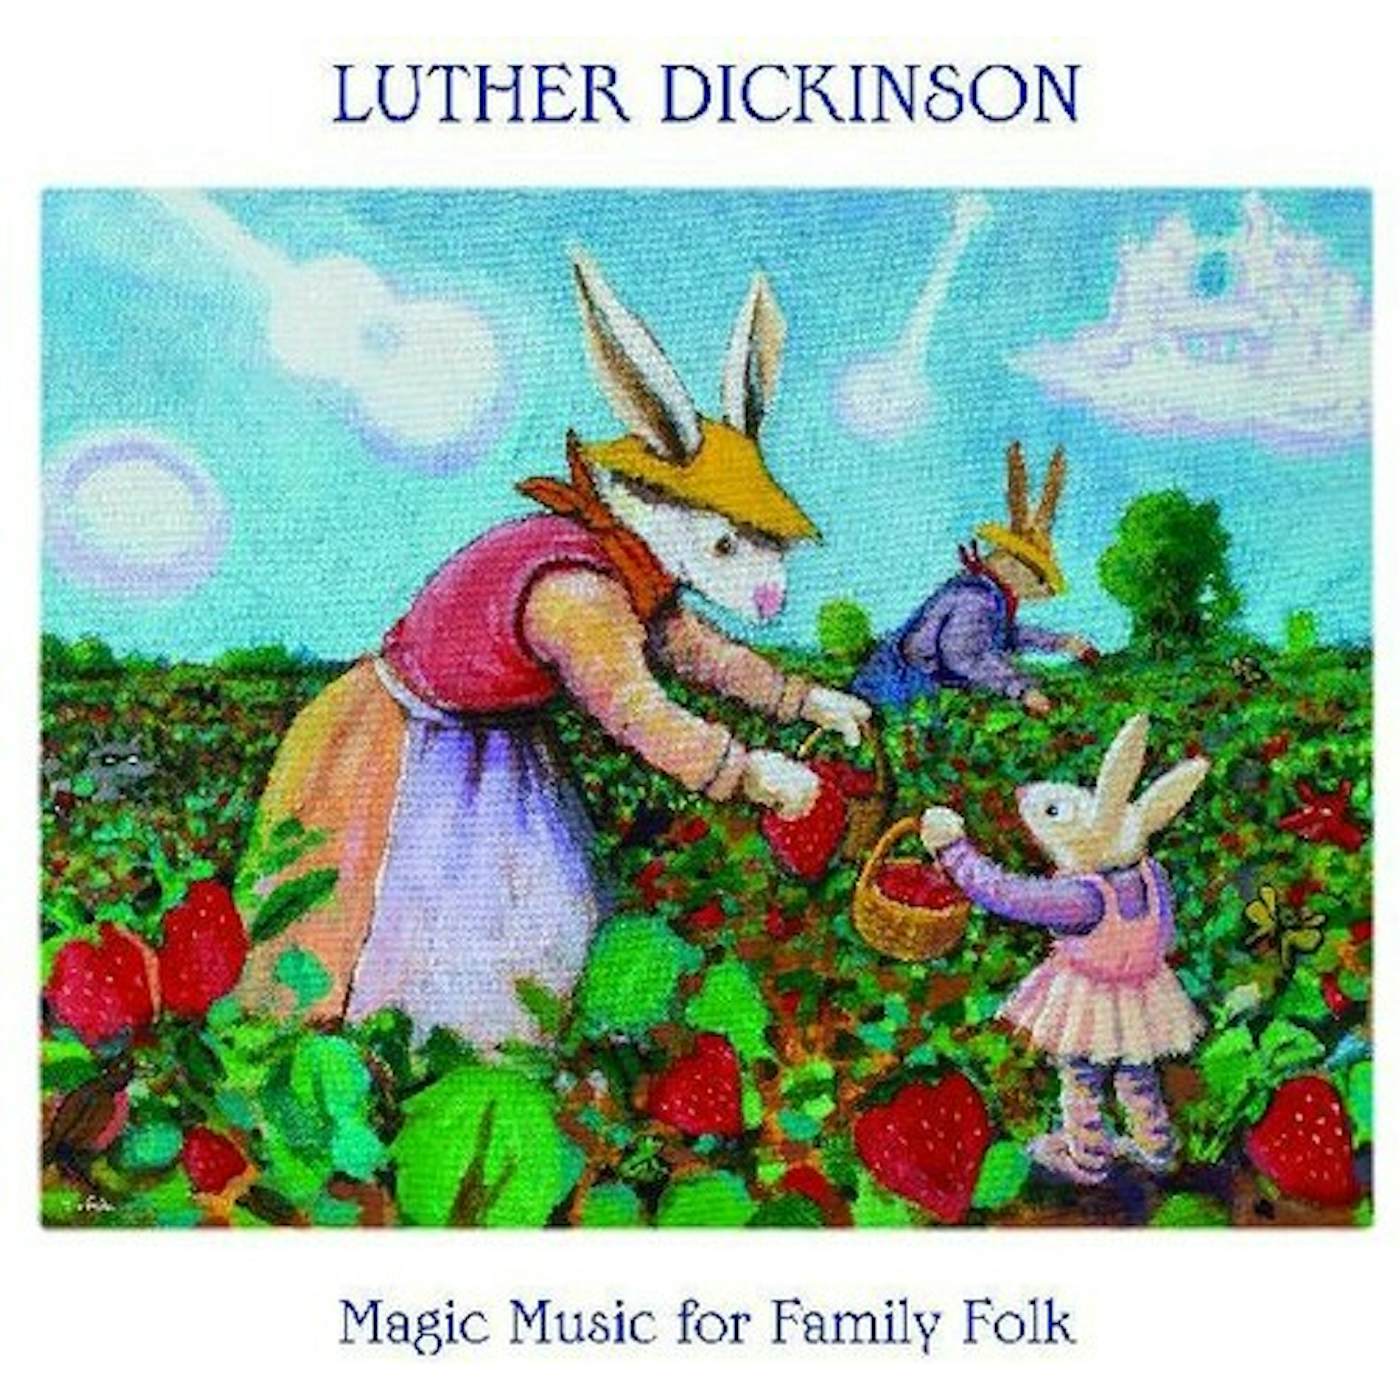 Luther Dickinson MAGIC MUSIC FOR FAMILY FOLK Vinyl Record